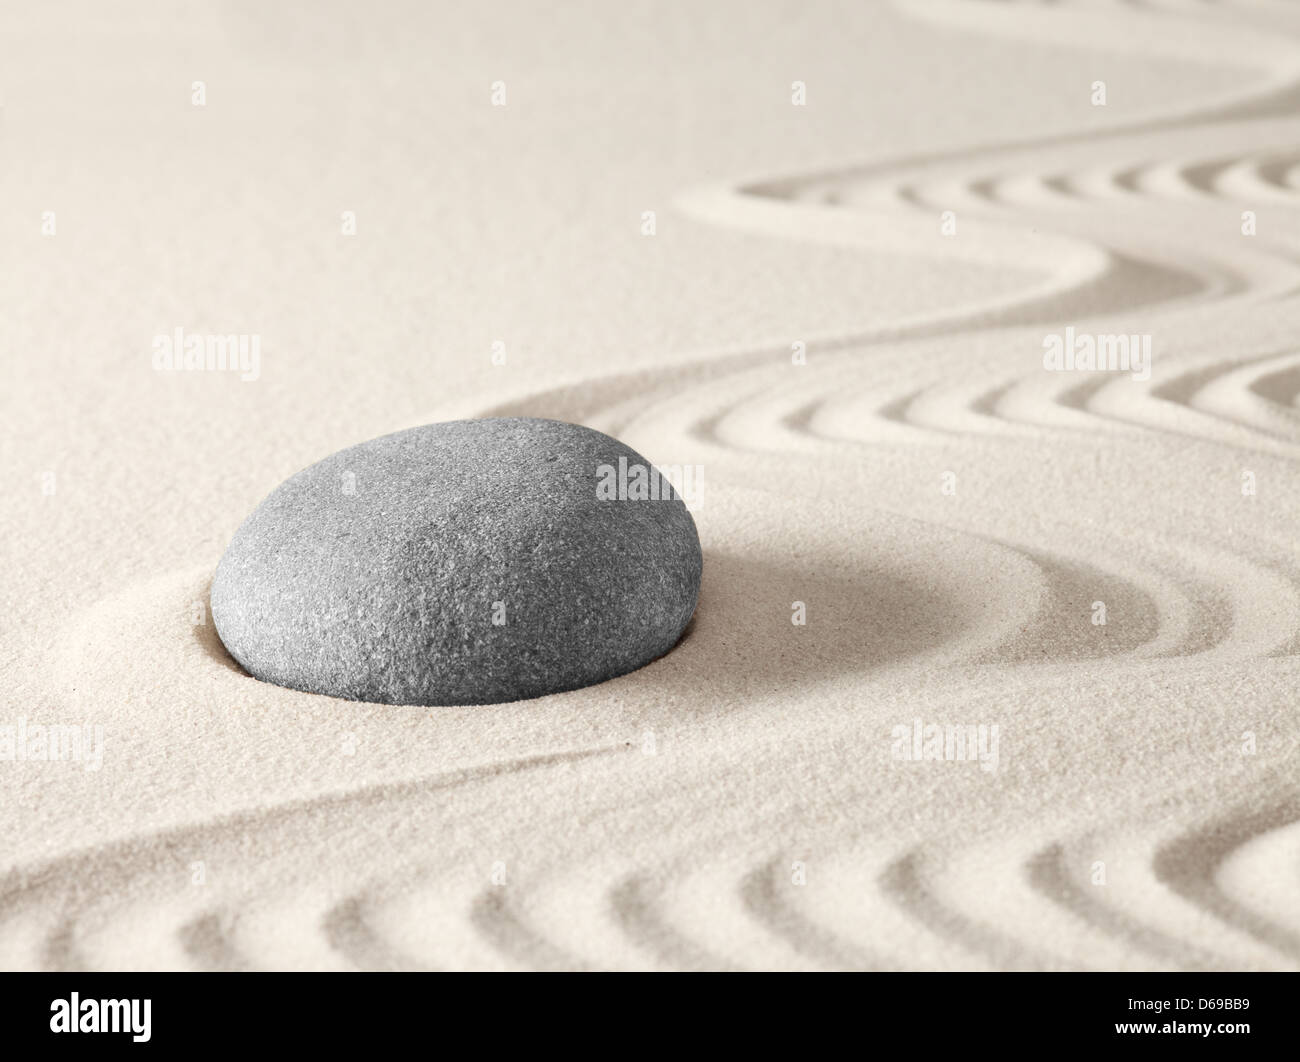 Zen meditation garden with round rock and lines in the sand. yoga buddhism or spa wellness background Stock Photo